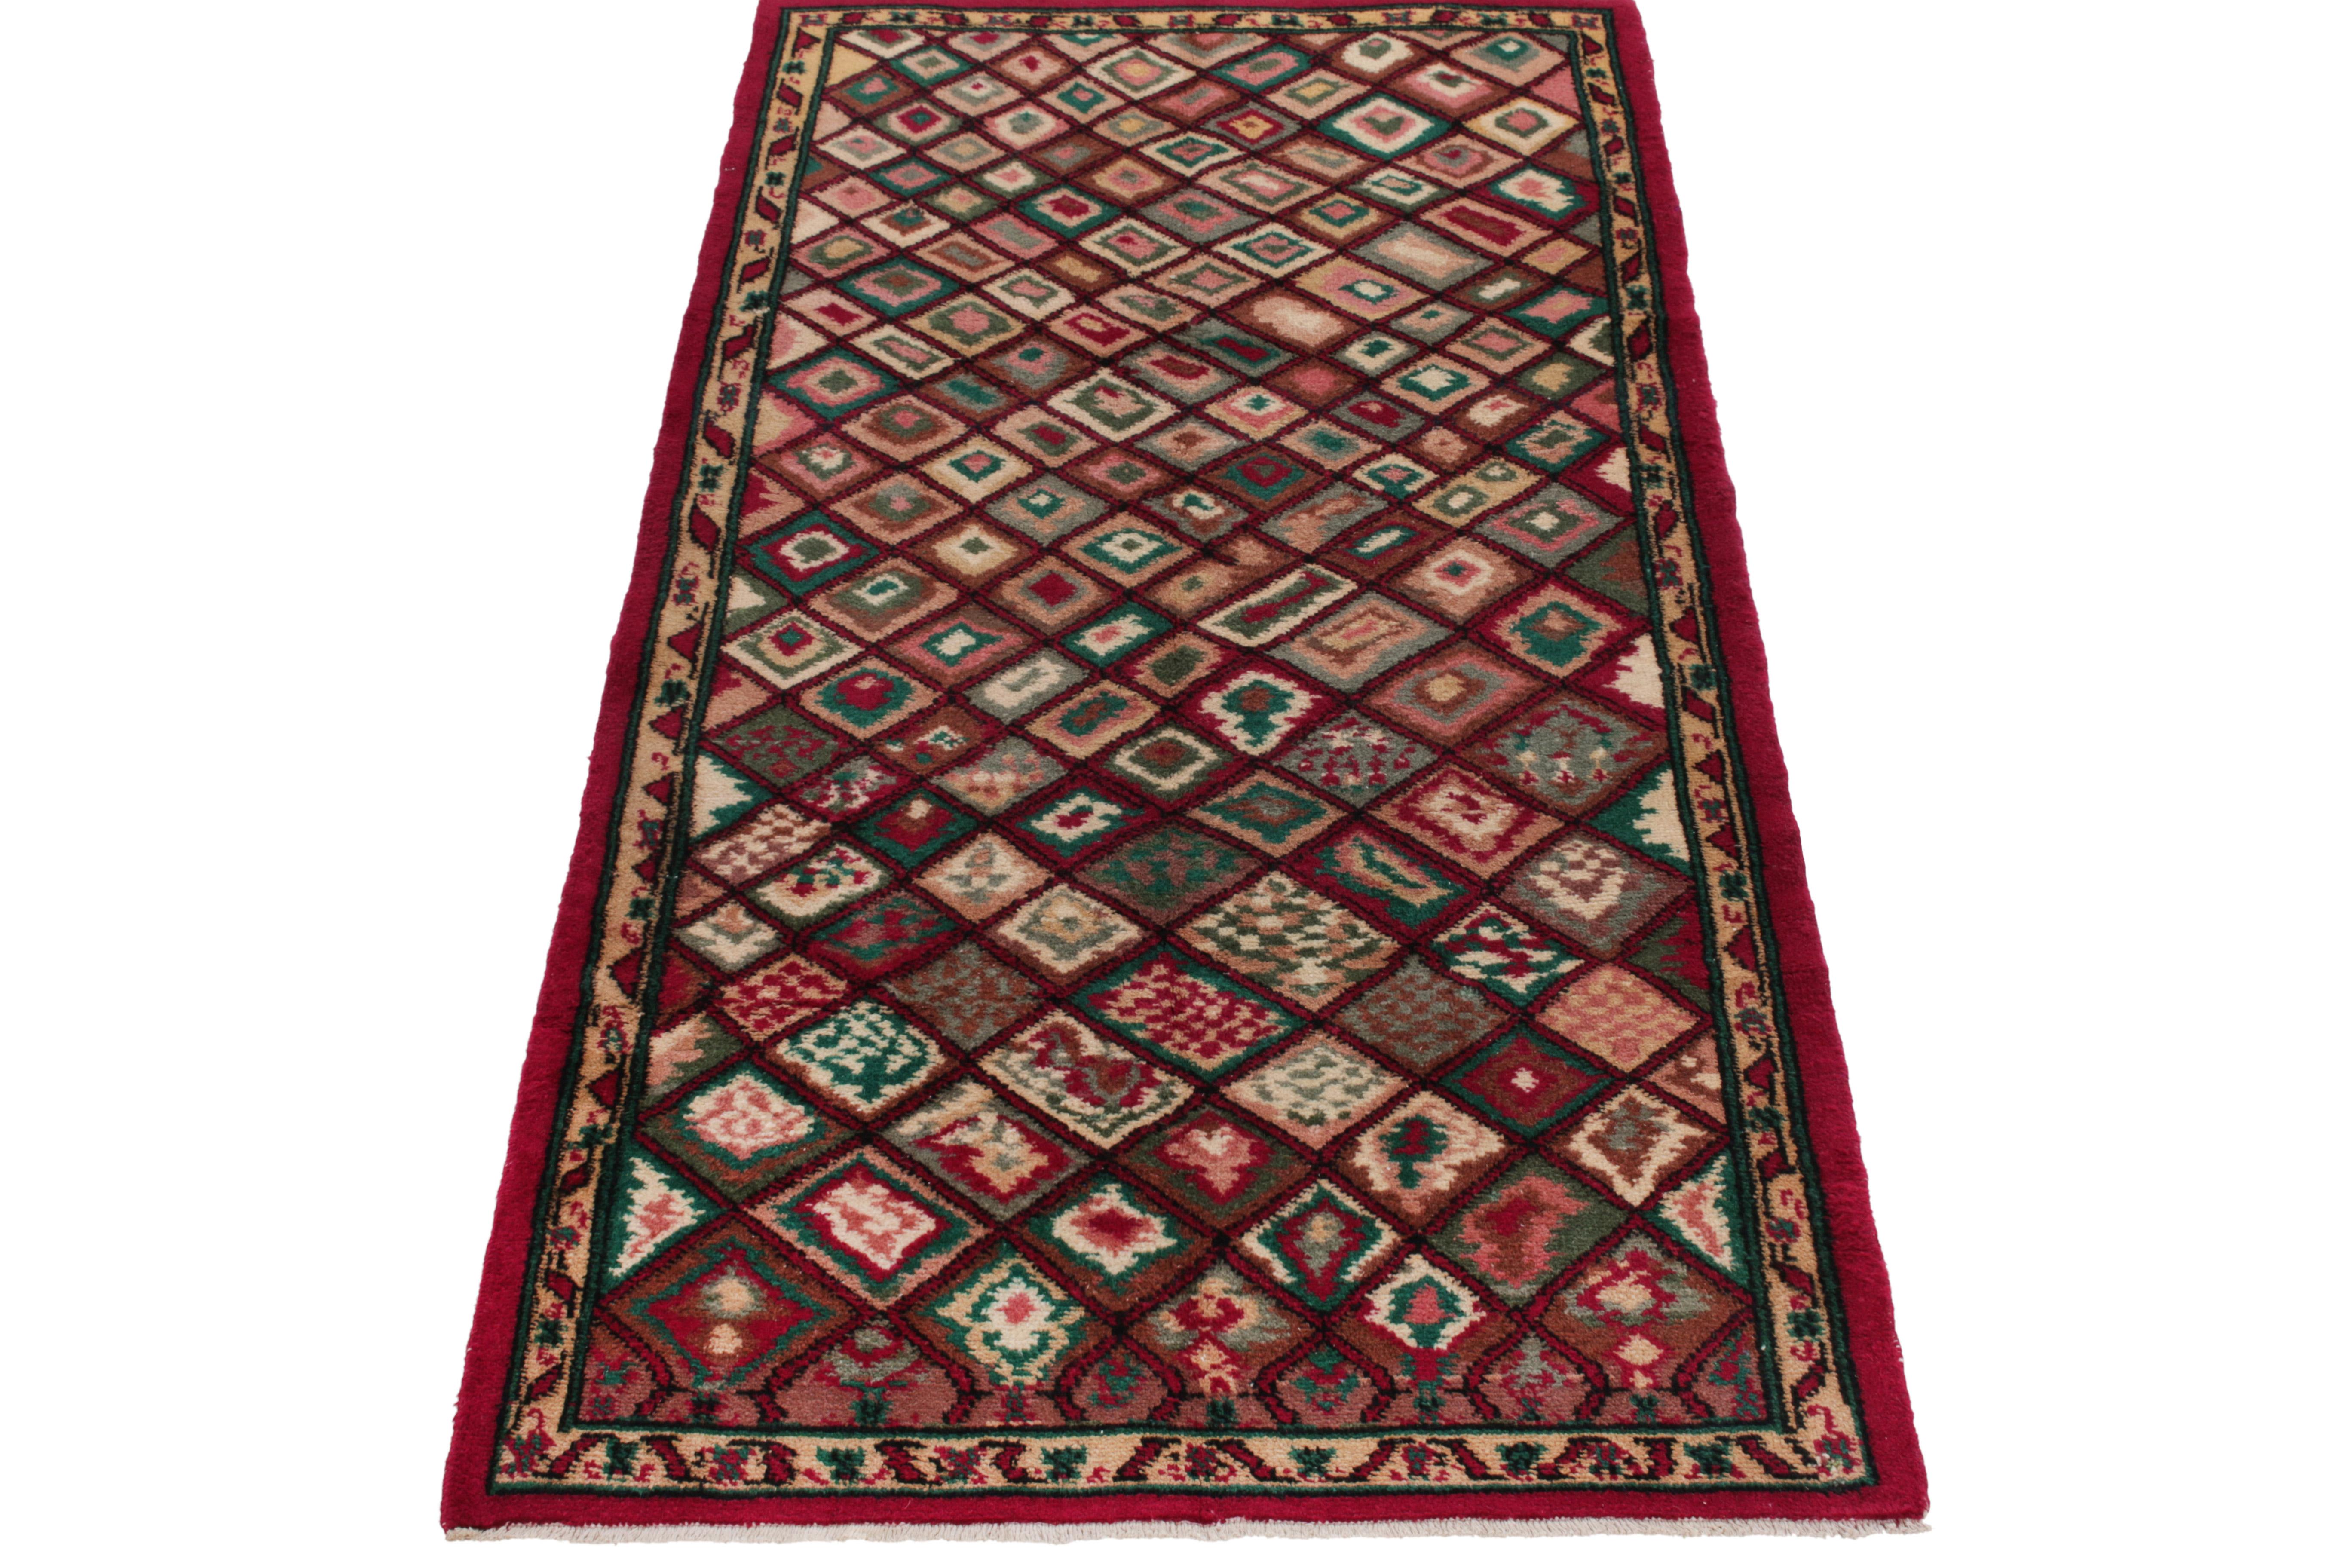 Hand-knotted in wool from Turkey circa 1950-1960, a 4x7 vintage rug from a bold multidisciplinary Turkish designer commemorated in Rug & Kilim’s Mid-Century Pasha Collection. The rug enjoys a continuous geometric pattern in scarlet red & forest